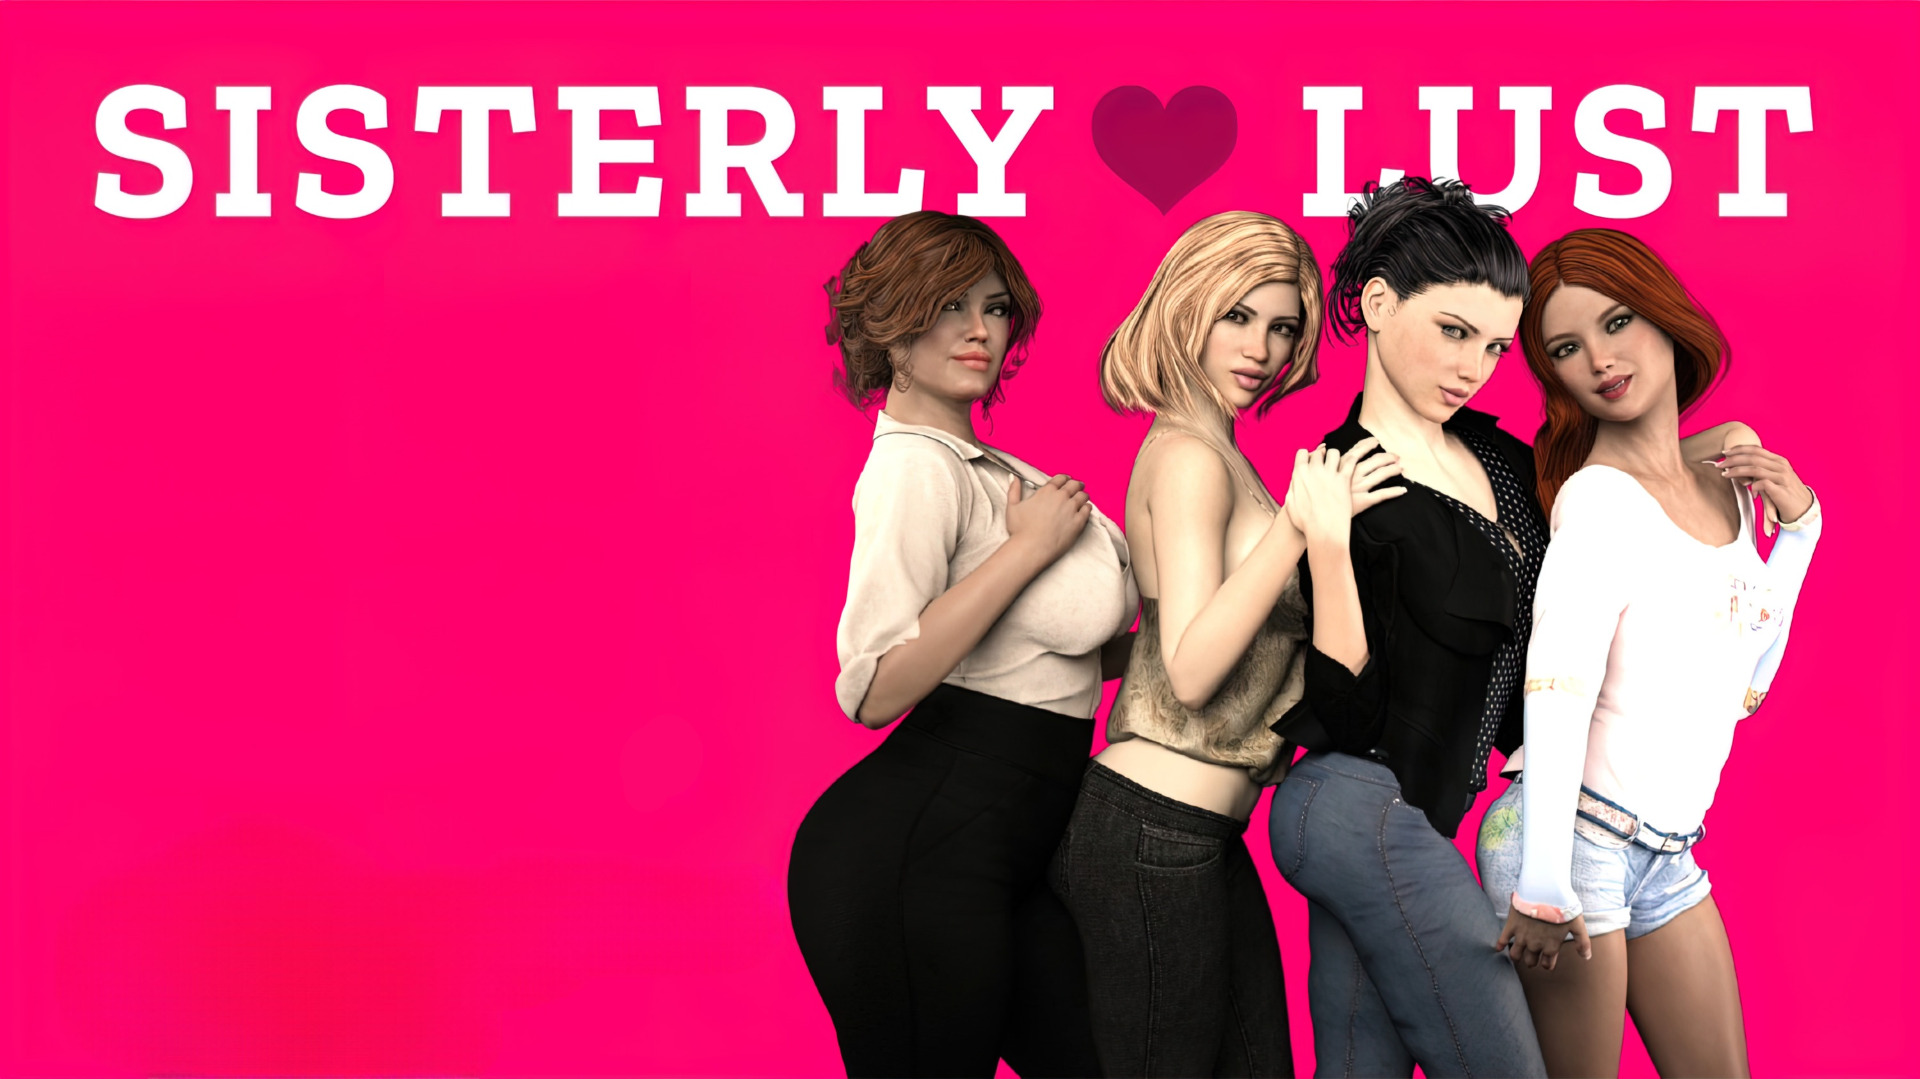 Sisterly Lust porn xxx game download cover